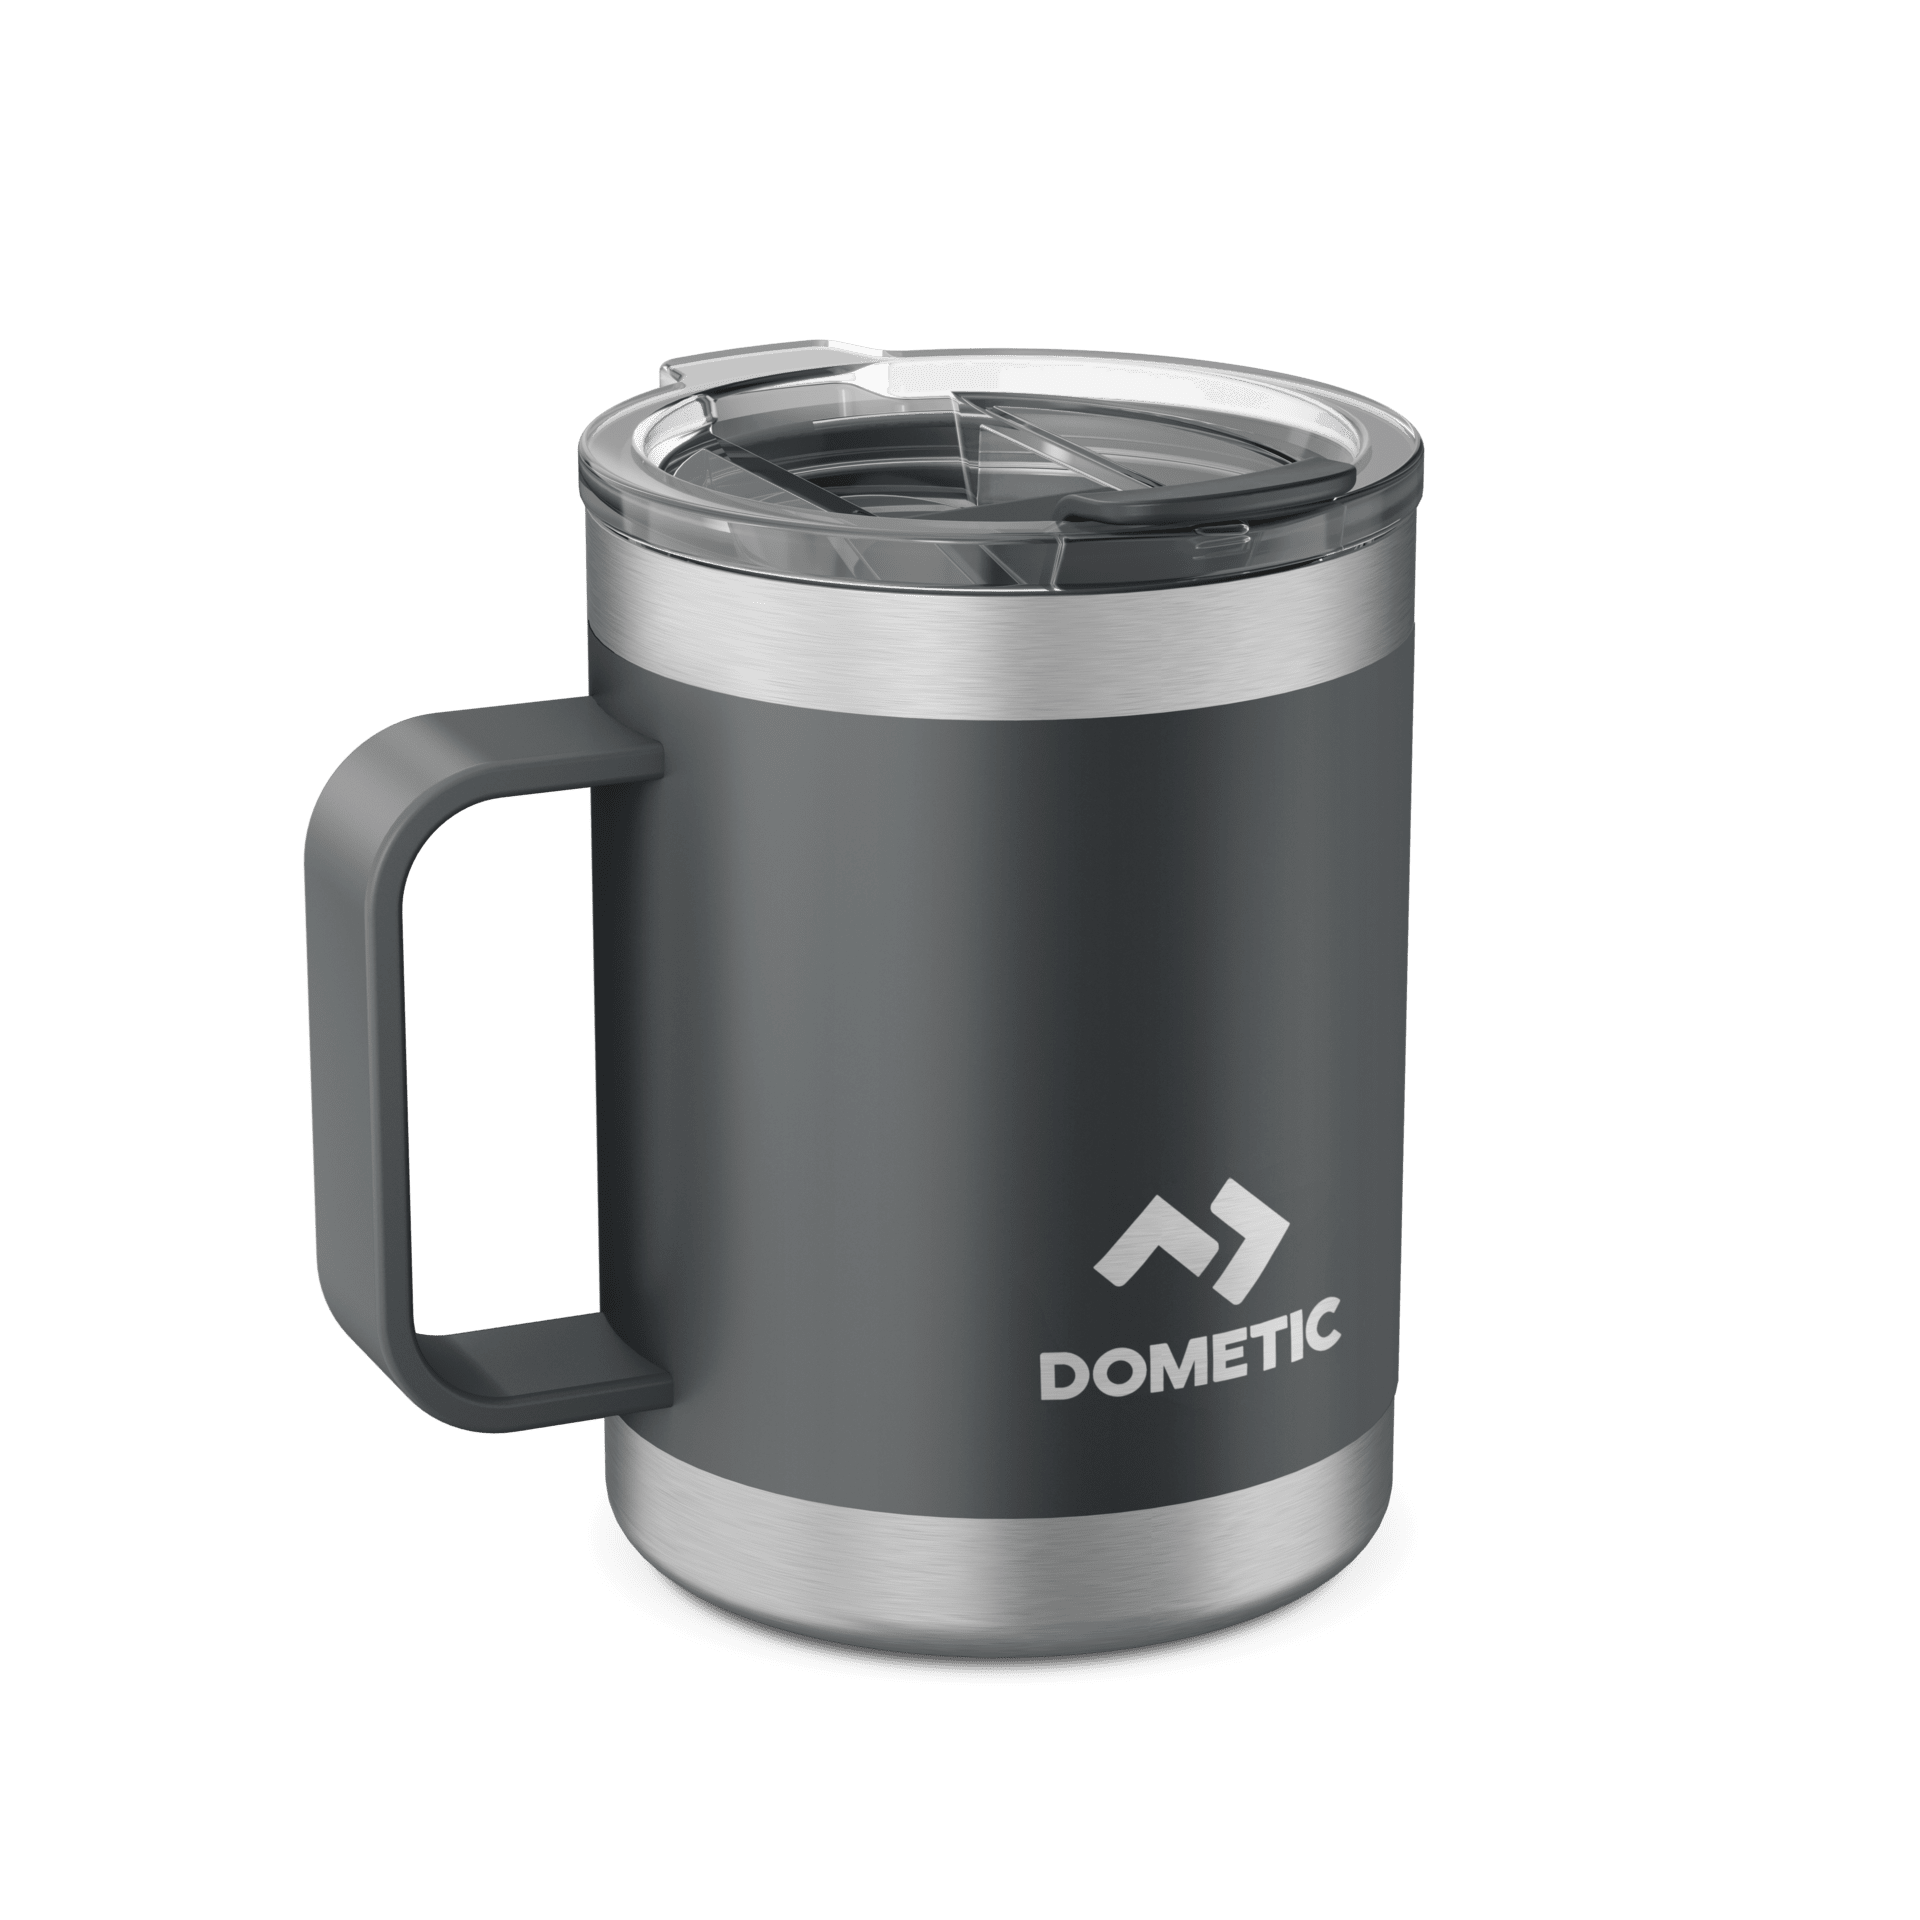 https://www.dometic.com/externalassets/dometic-thermo-mug-45_9600050958_90716.png?ref=2120101433